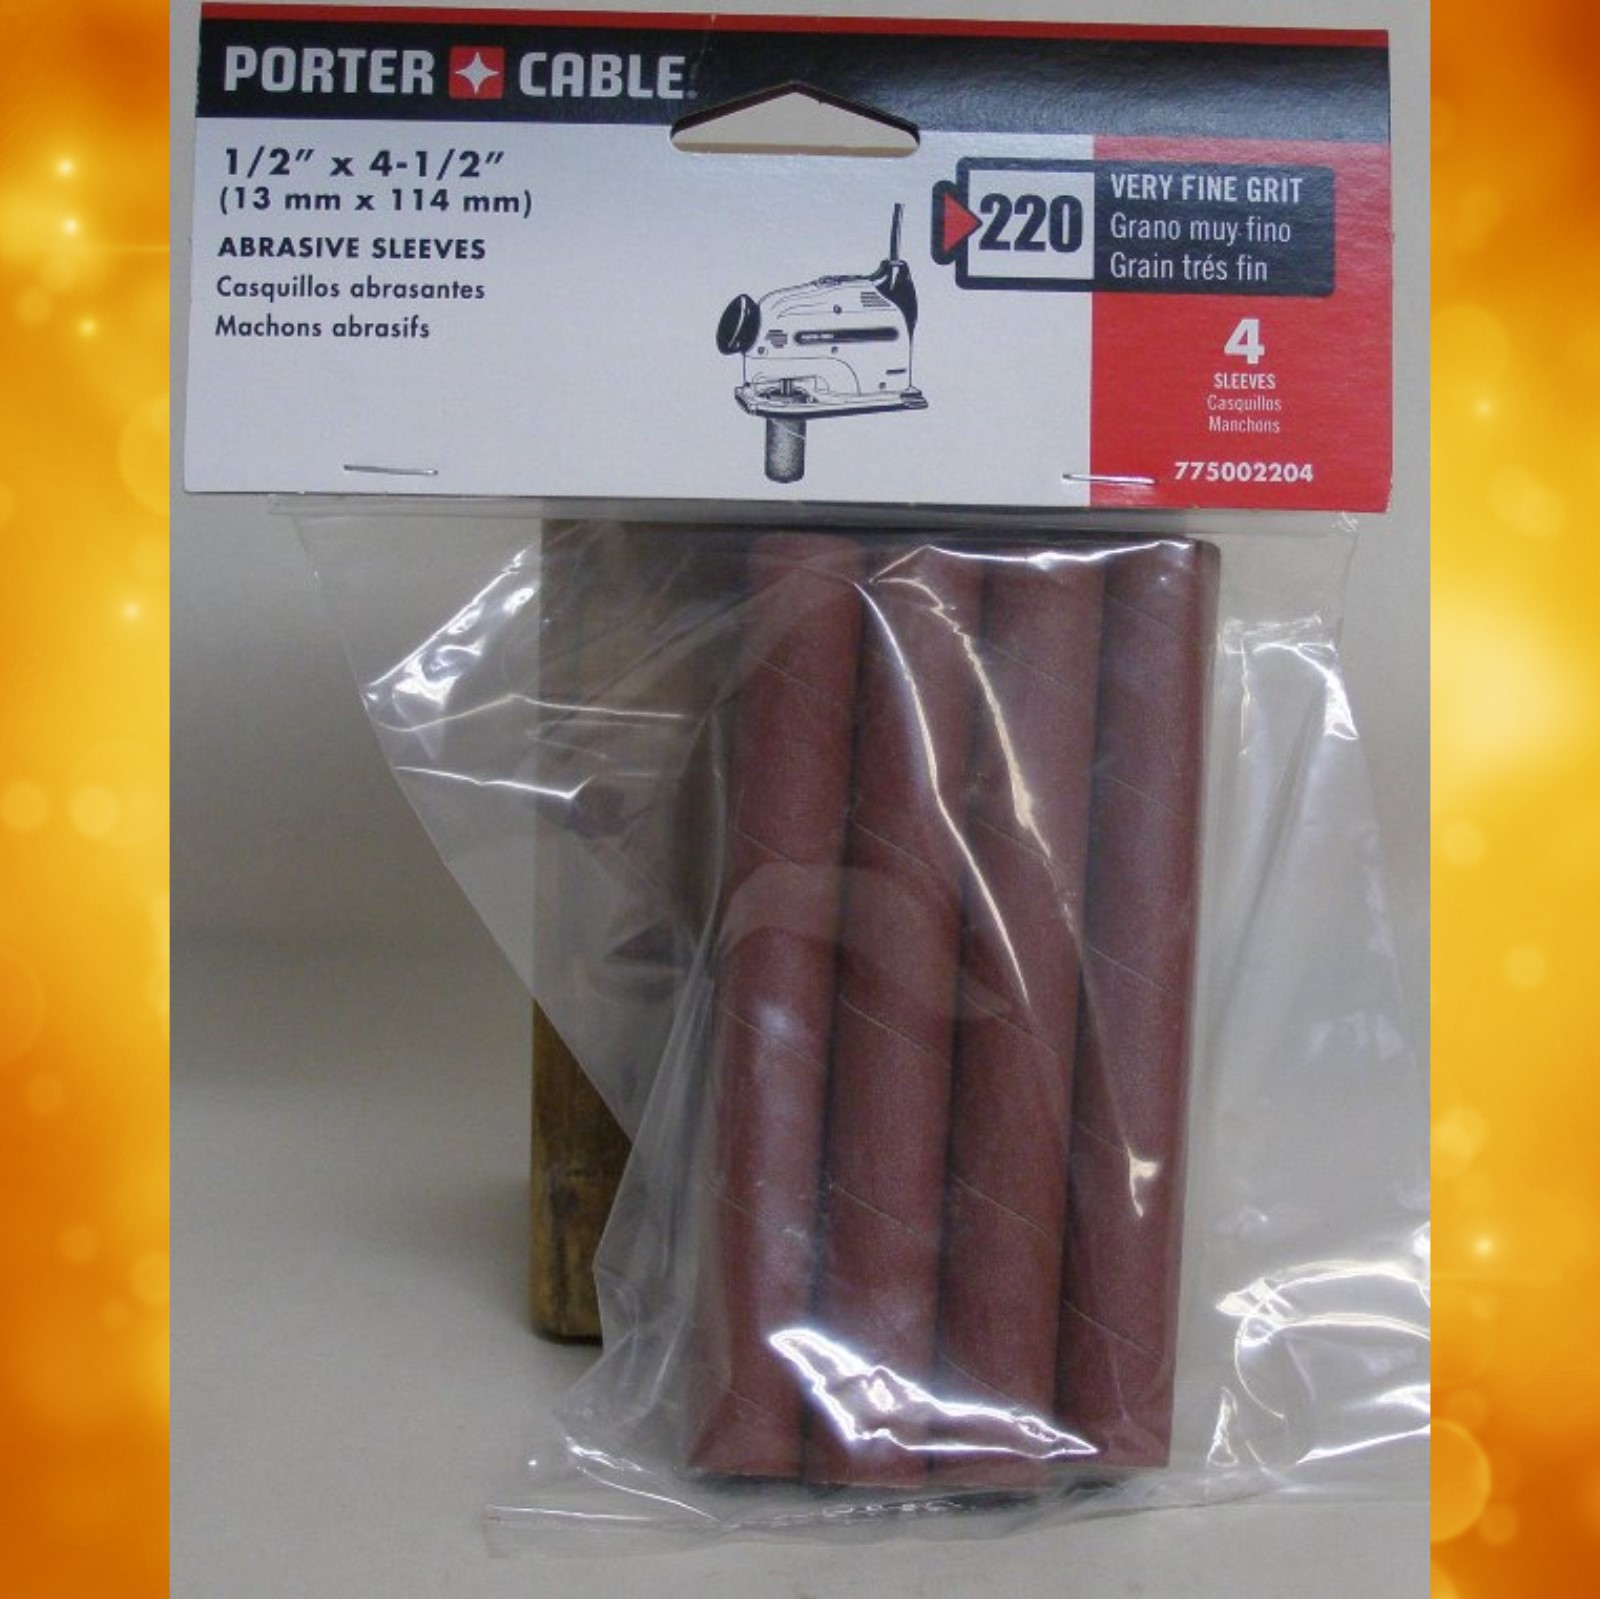 Porter Cable Pack of 2 " x 4-1/2" 220 Grit Abrasive Sleeves 771502202     4 PK 